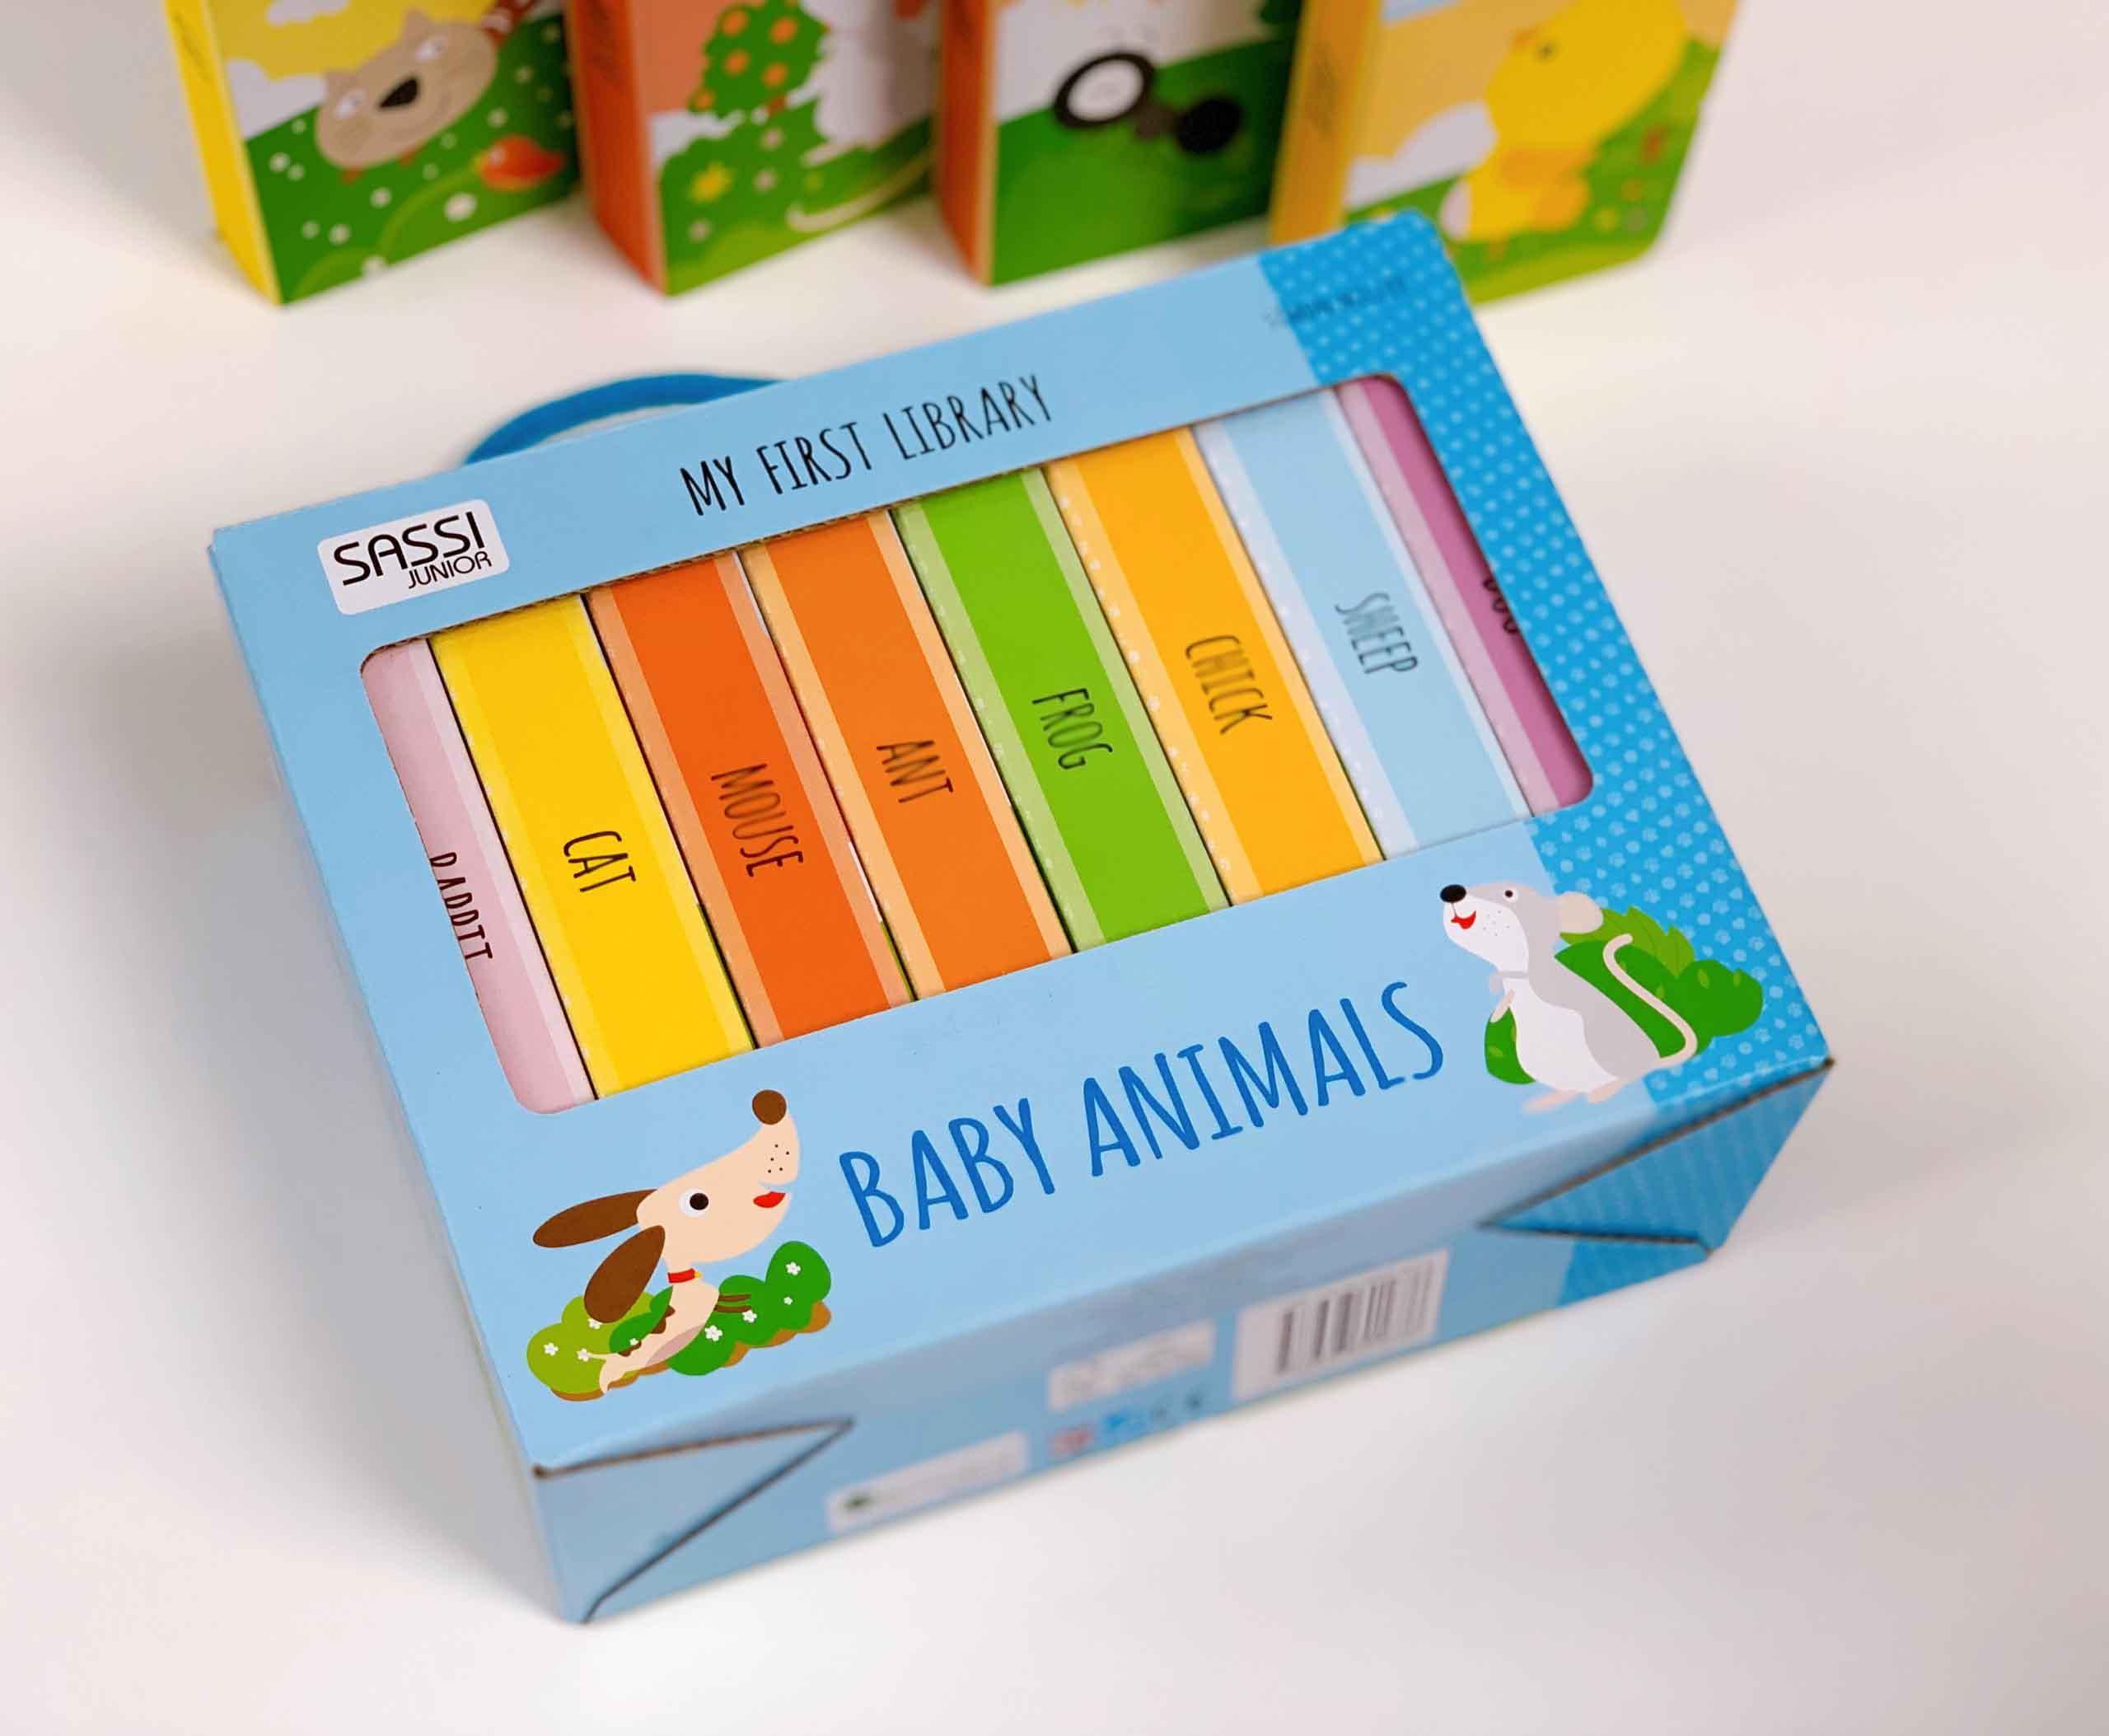 My First Library: Baby Animals